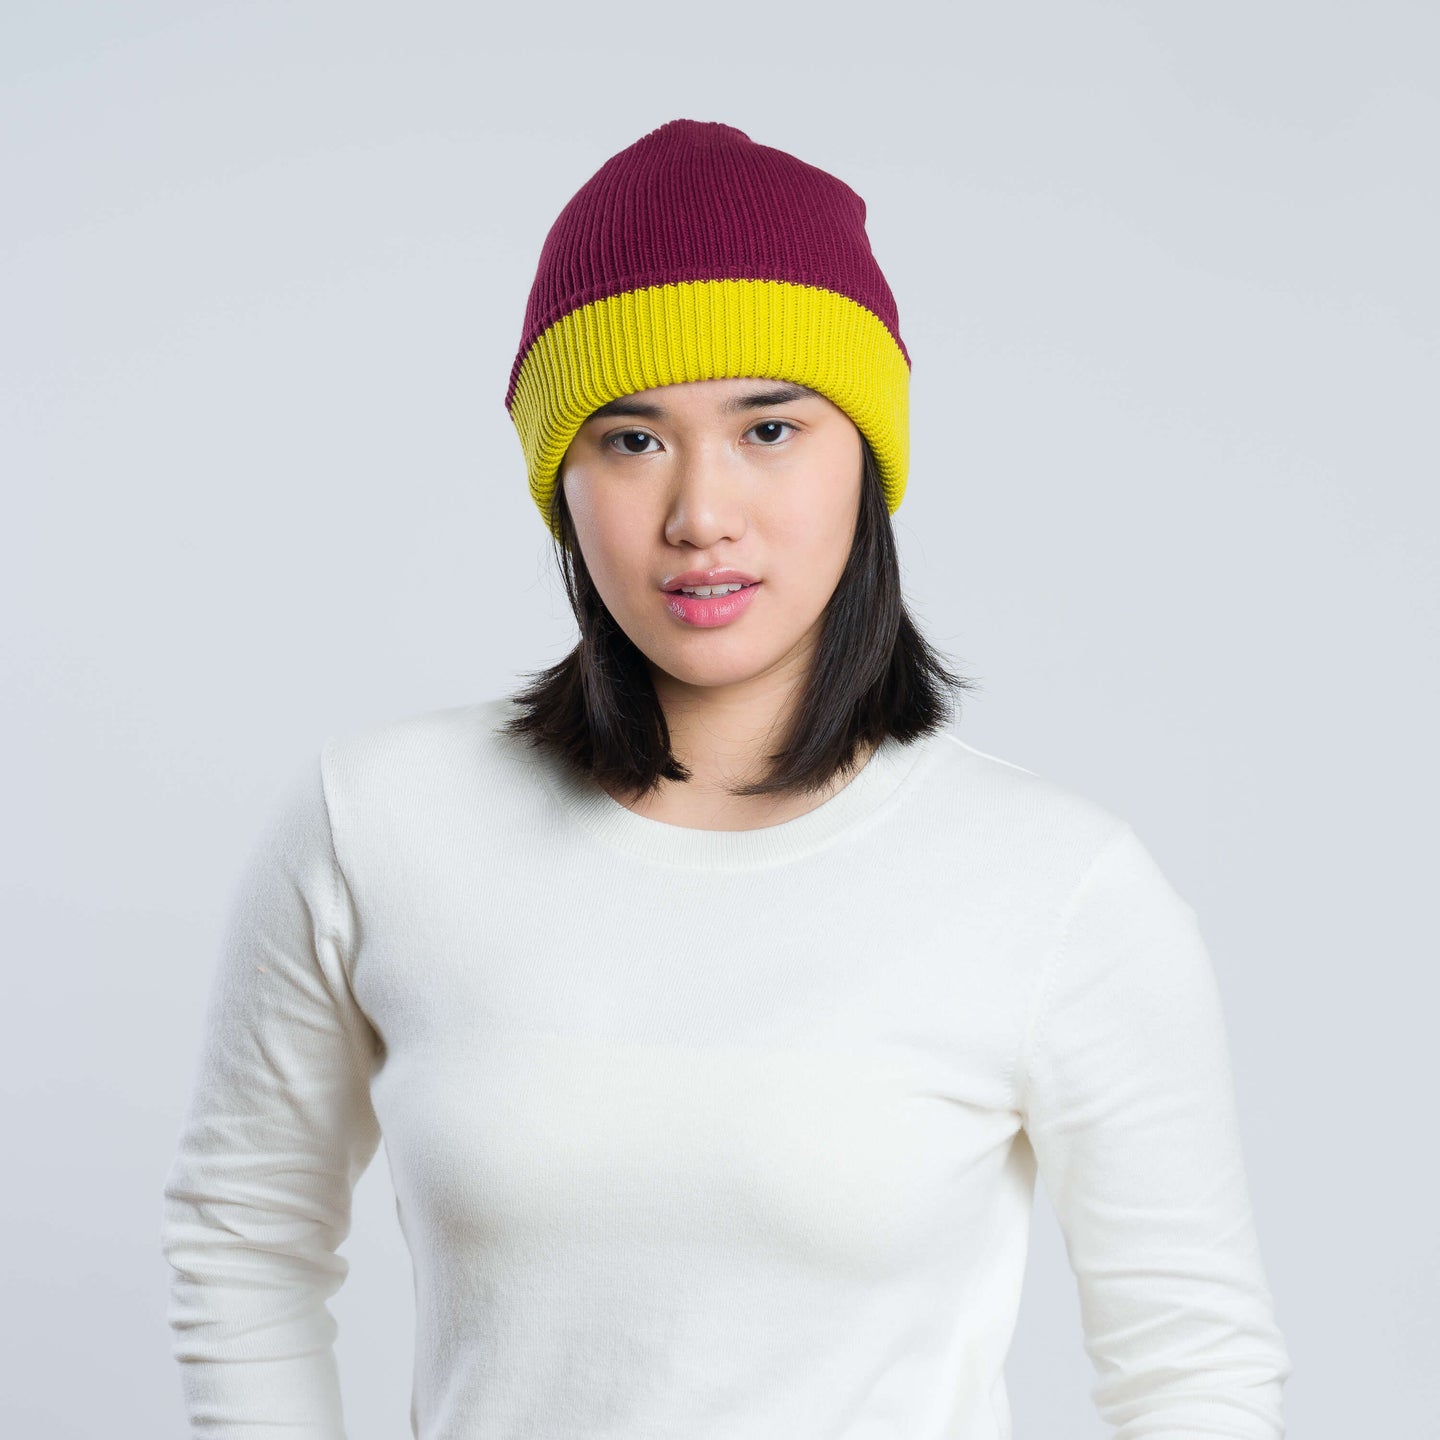 Ribbed Reversible Knit Winter Beanie Slouchy Hat